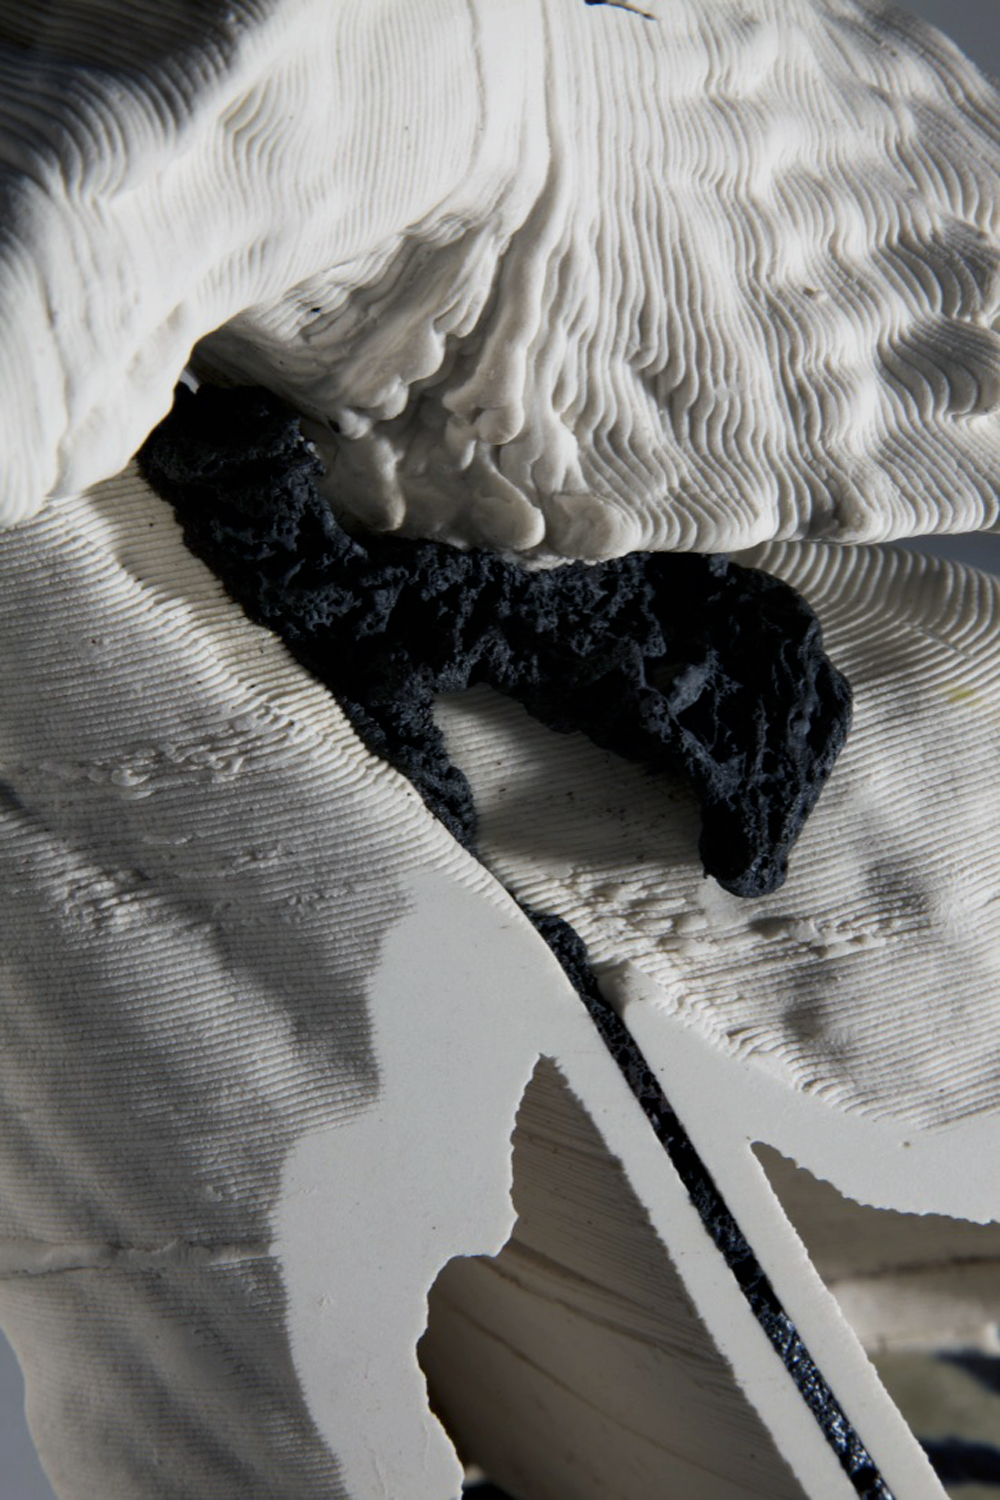  State Actor Detail  2019  3d printed porcelain, steel  16.5in. h x 11in. w x 11in. d 